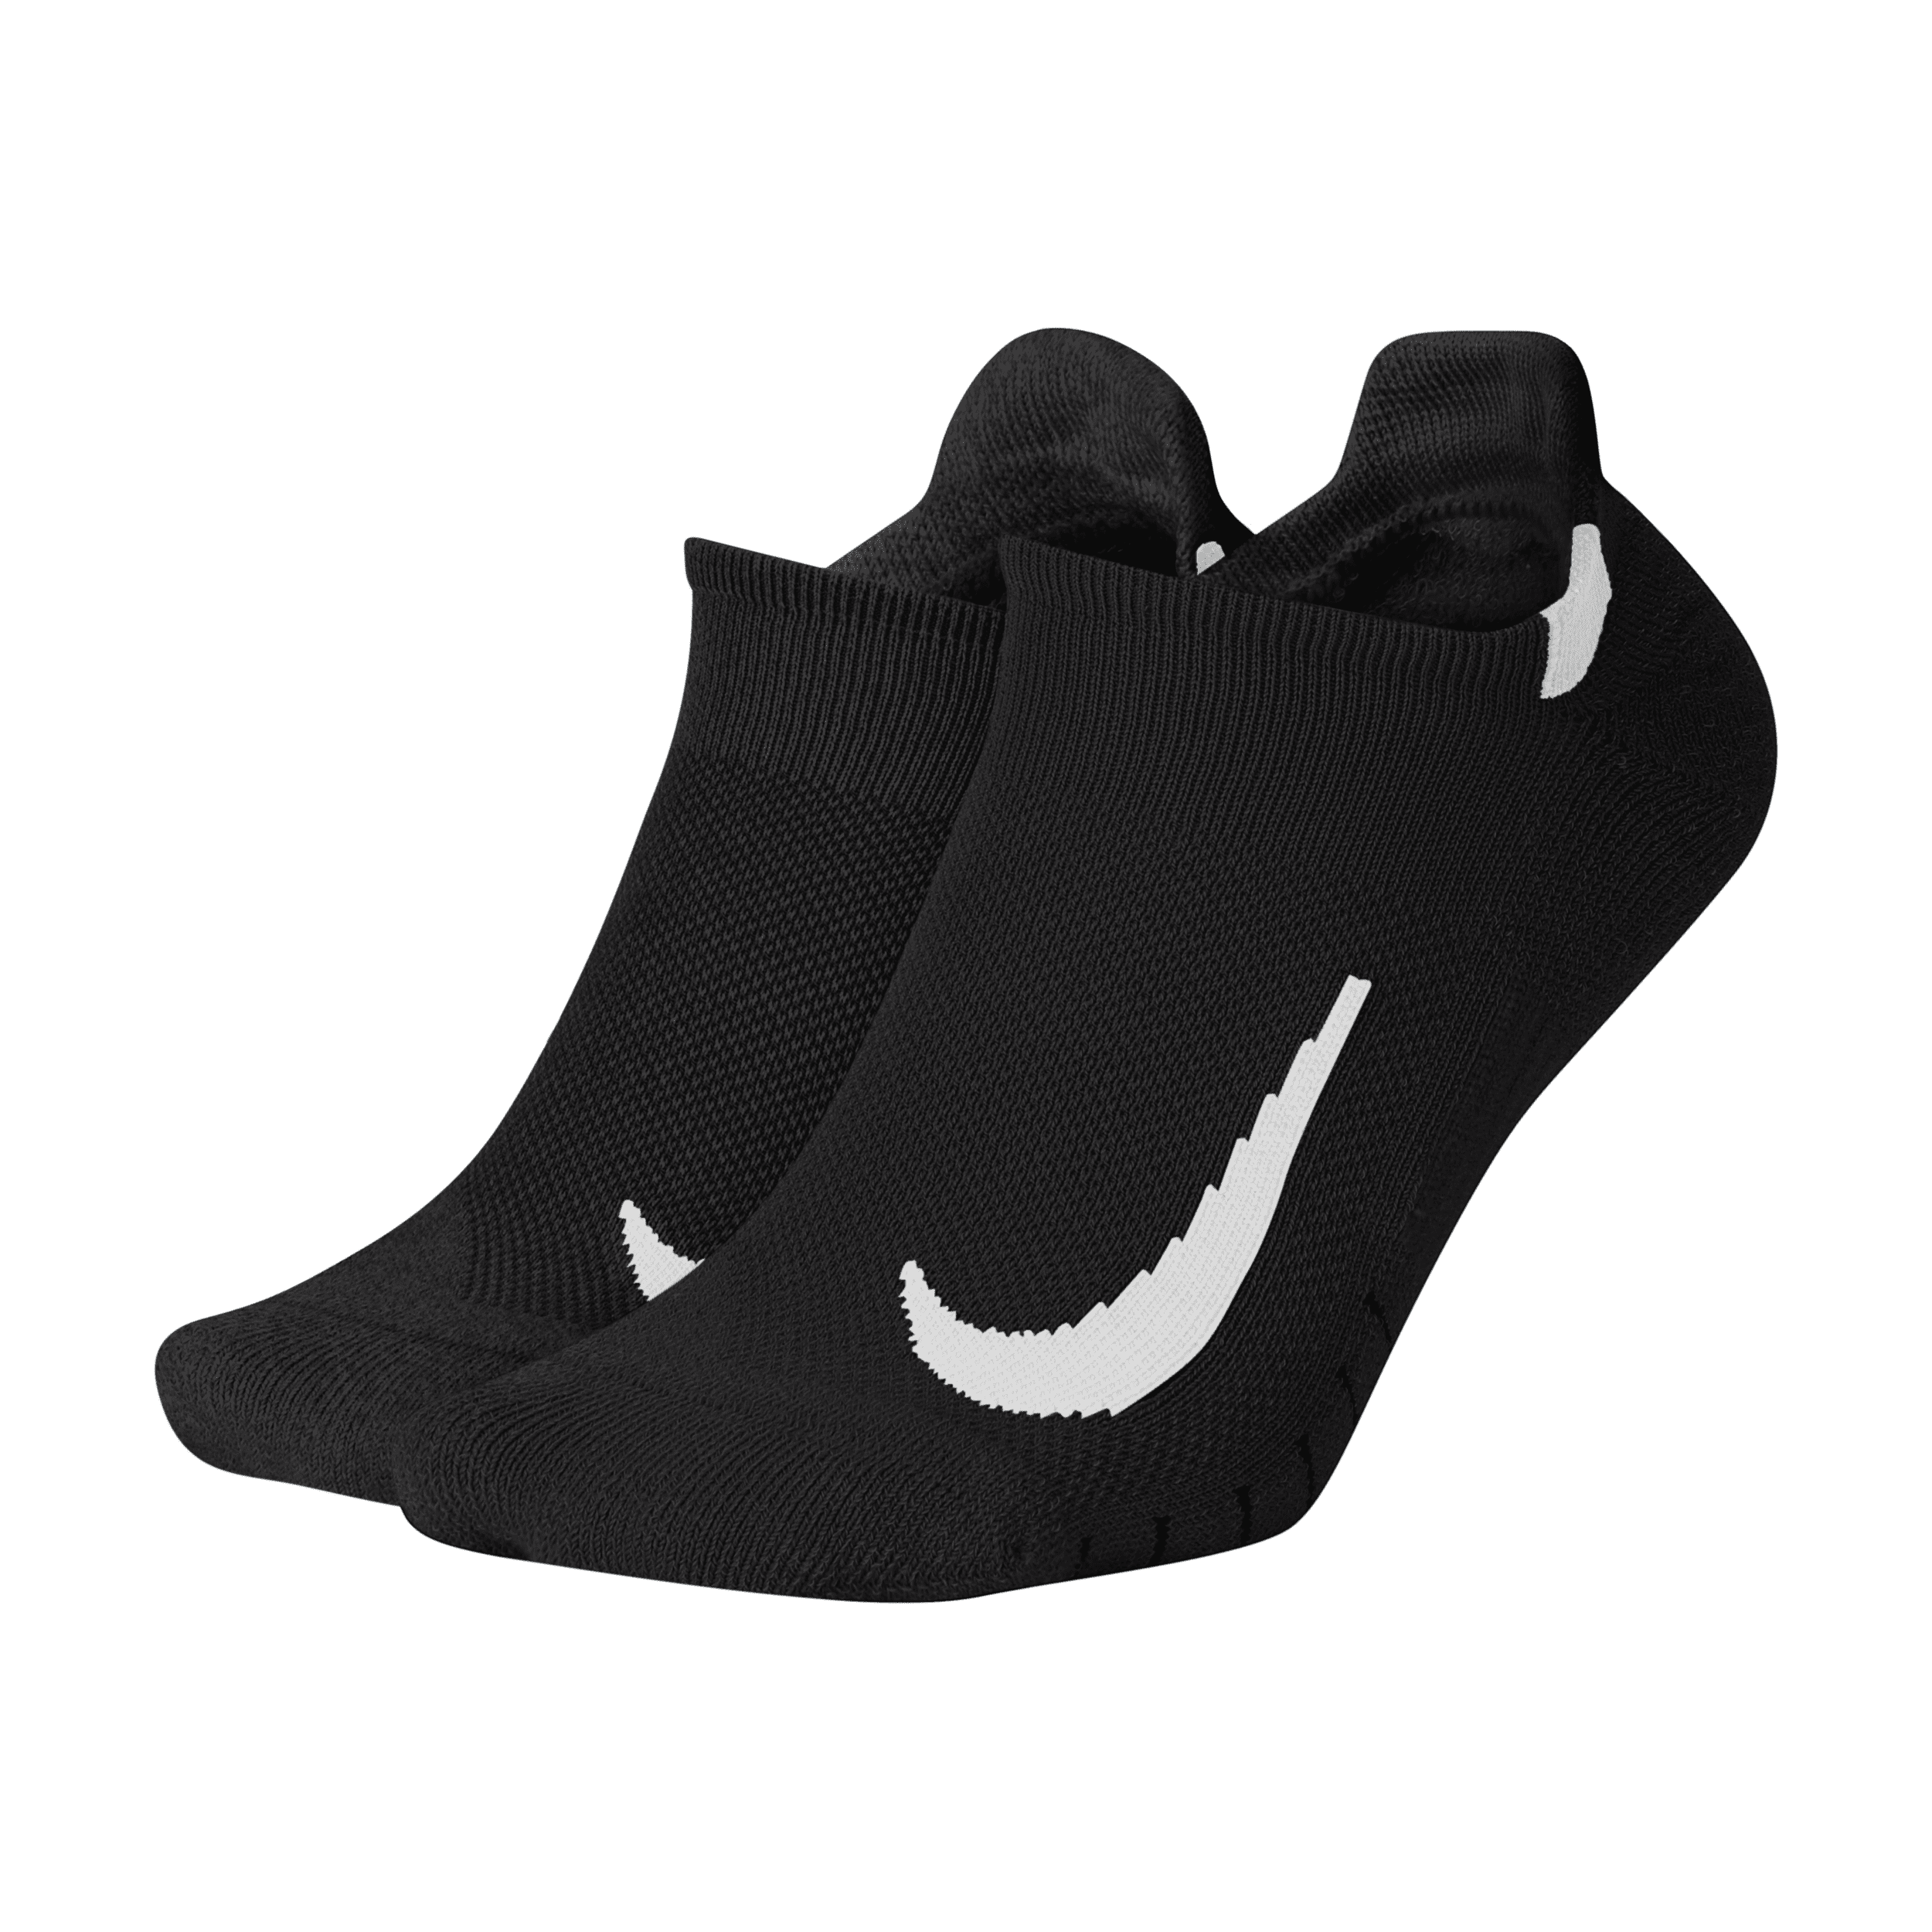 Nike Multiplier Calcetines invisibles de running (2 pares) - Negro